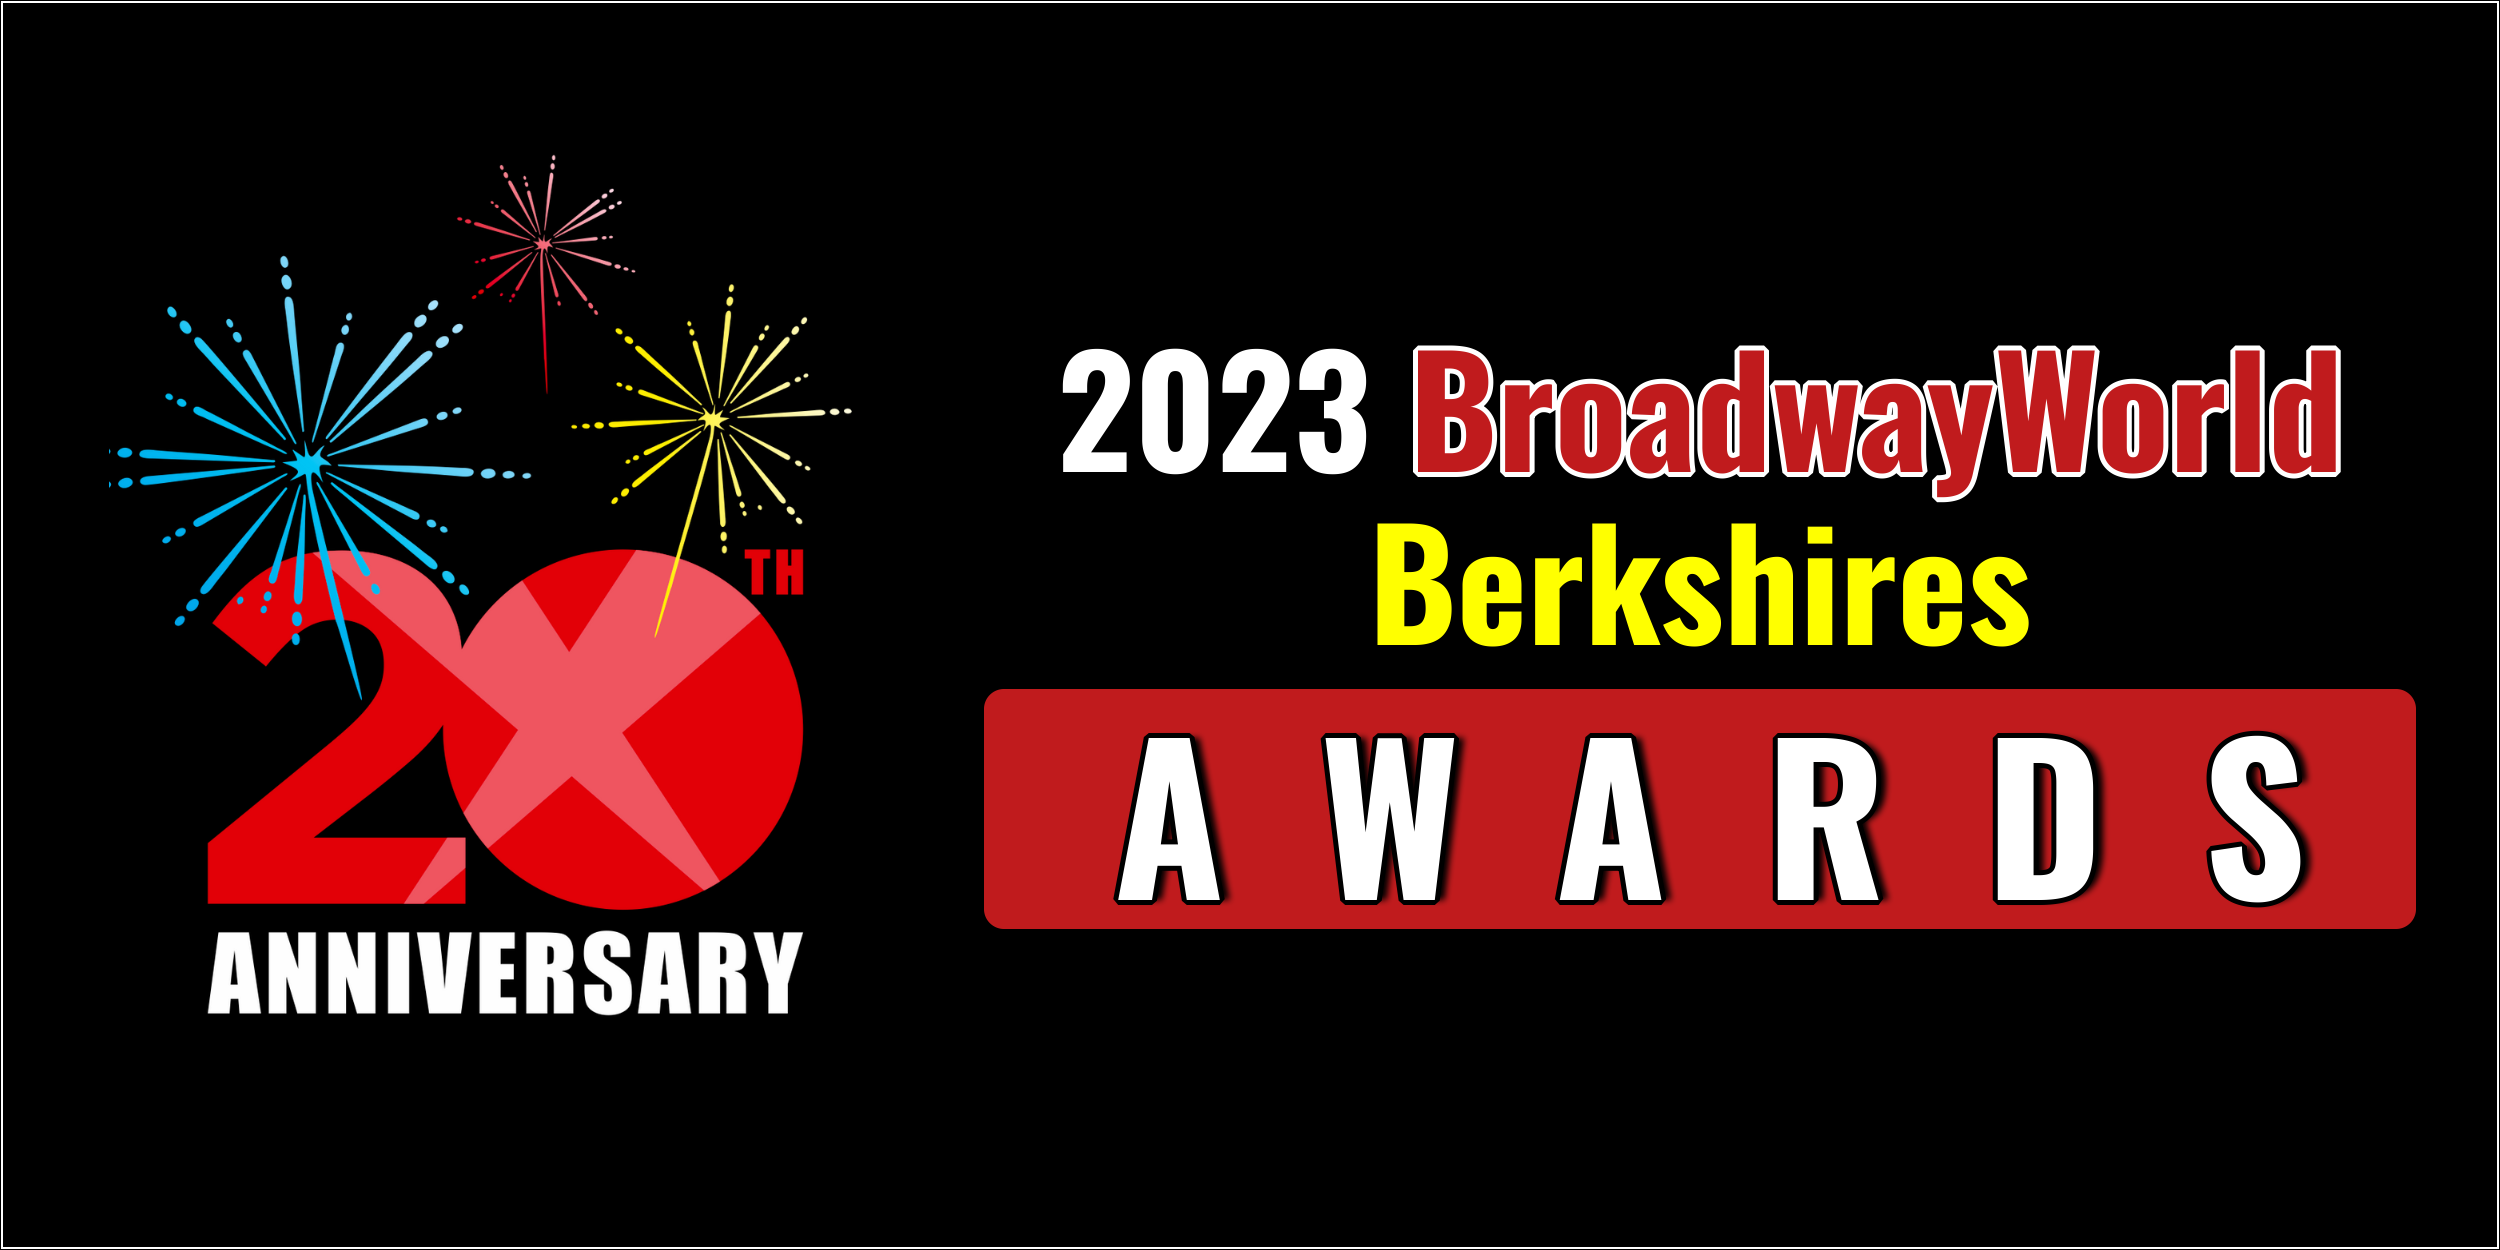 Latest Standings Announced For The 2023 BroadwayWorld Berkshires Awards; BRIGHT STAR Leads Photo